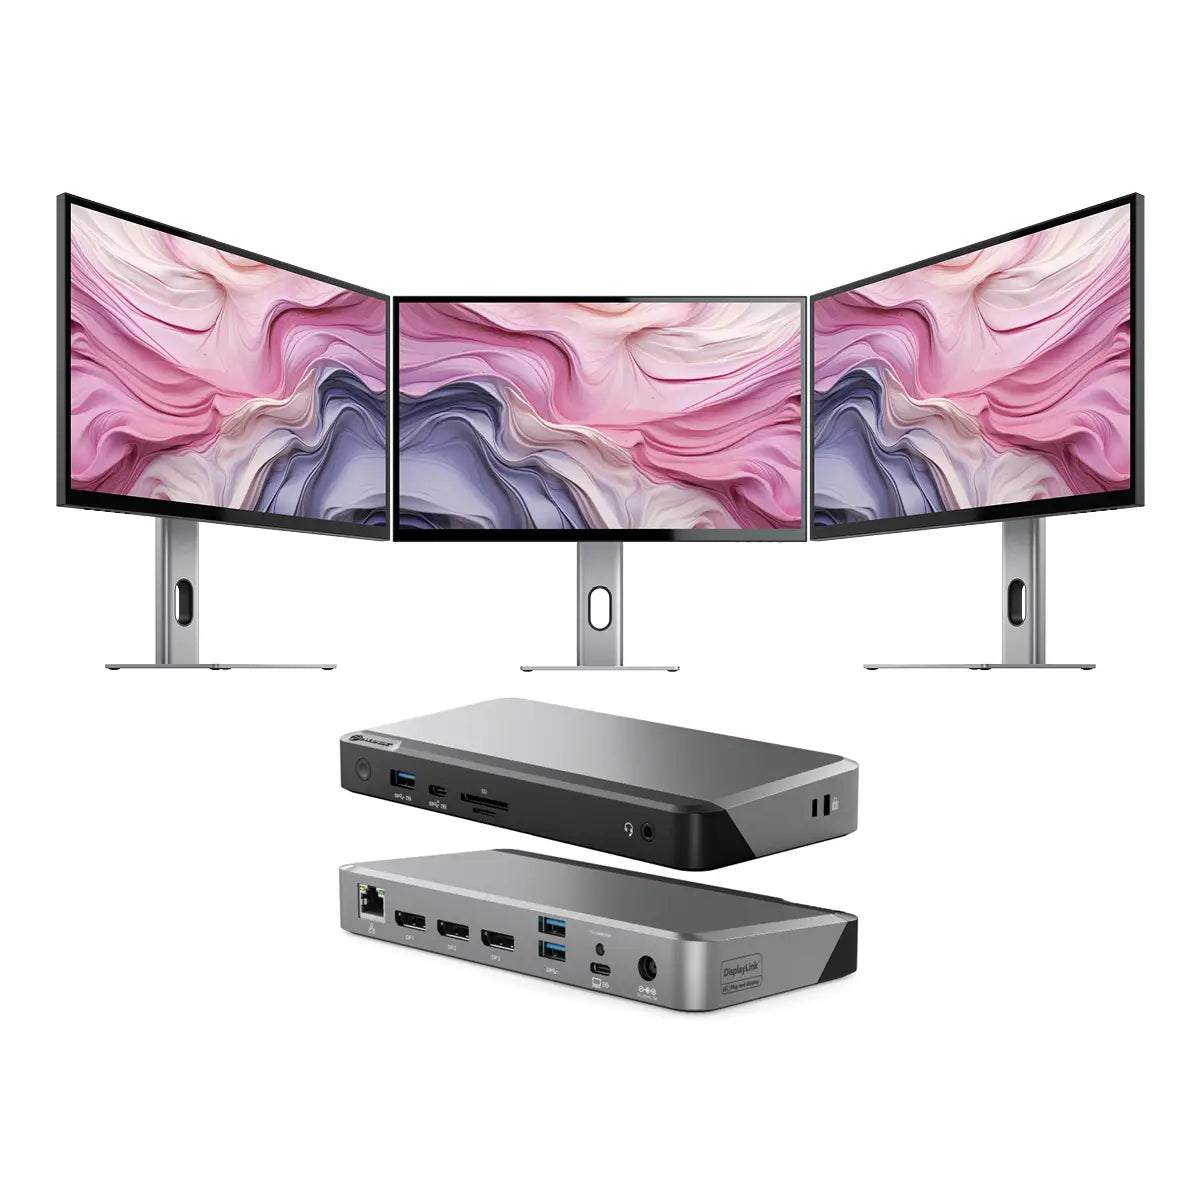 clarity-27-uhd-4k-monitor-pack-of-3-dx3-triple-4k-display-universal-docking-station-with-100w-power-delivery_1